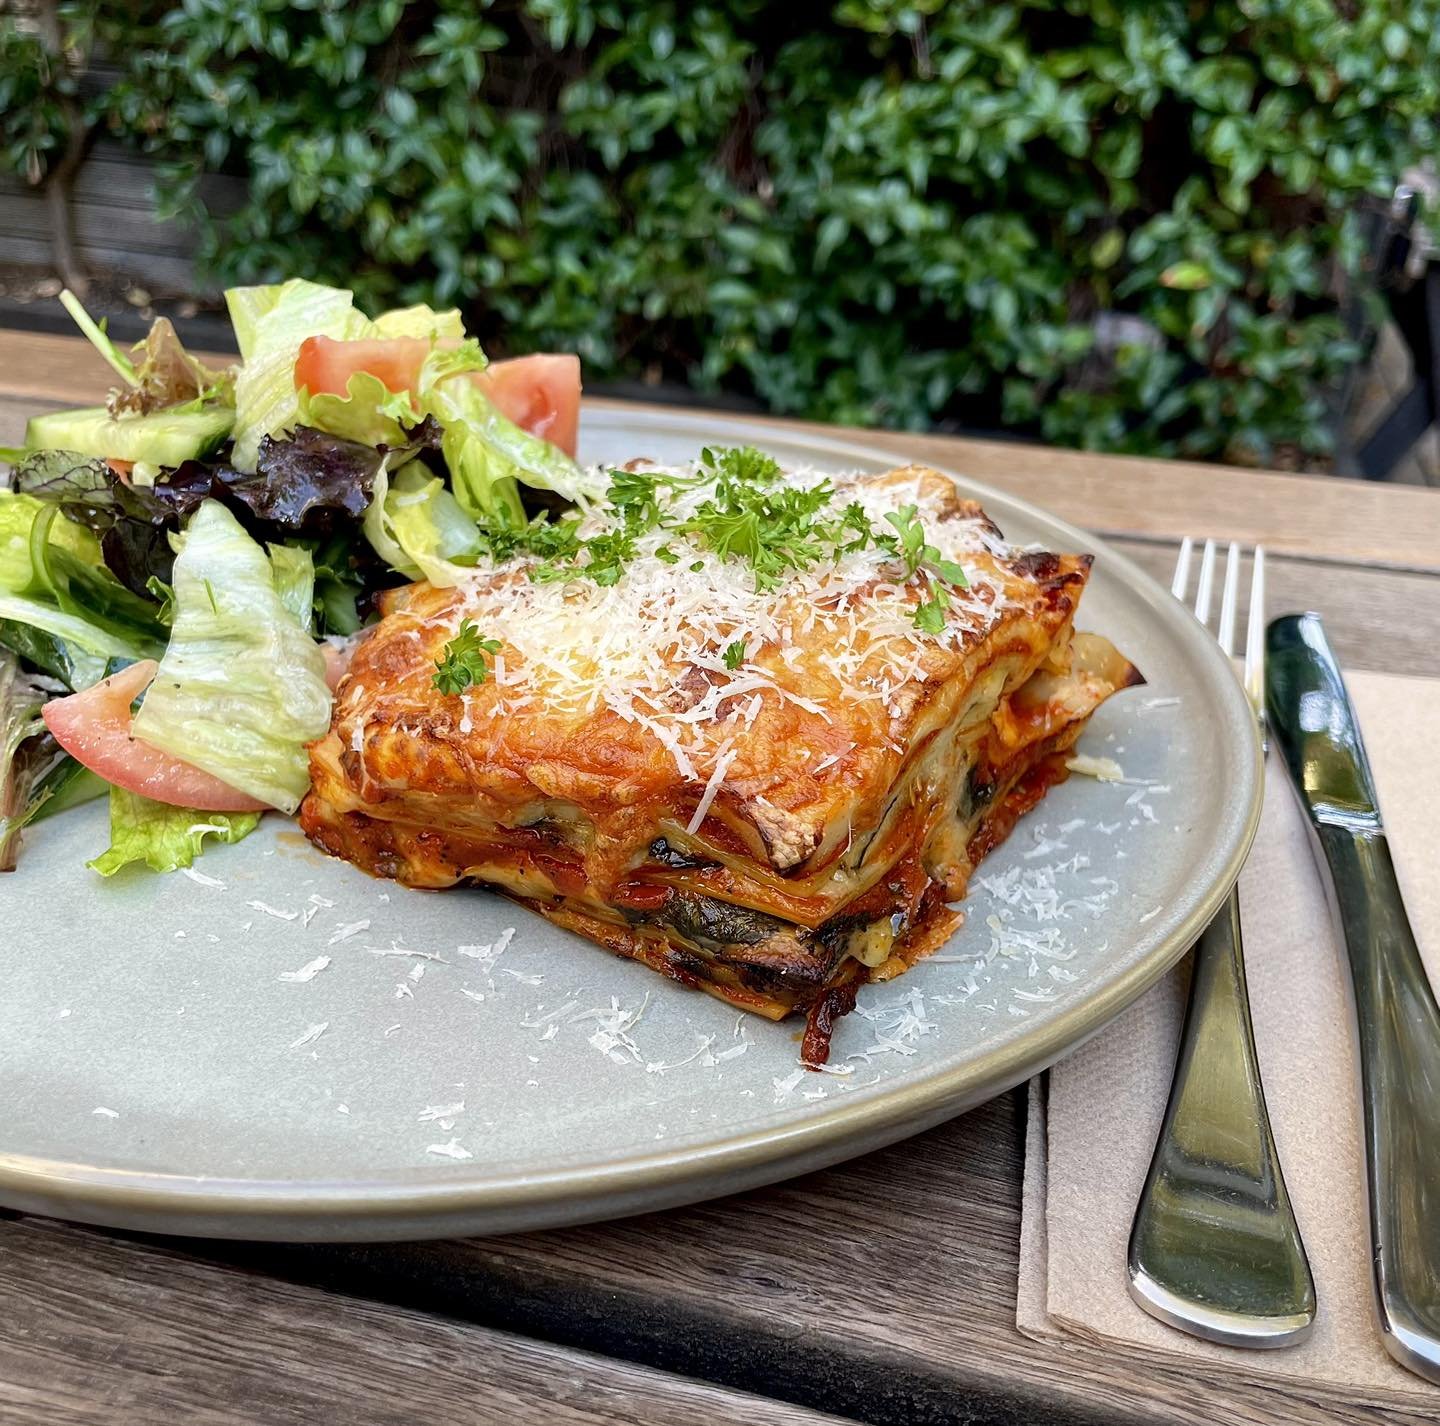 We know a thing or two about comfort food 😏 

House-made vegetarian lasagne with grilled zucchini, eggplant &amp; mushrooms, served with a garden salad (just to tick all the boxes 😉).

Available on our specials board, until sold out.